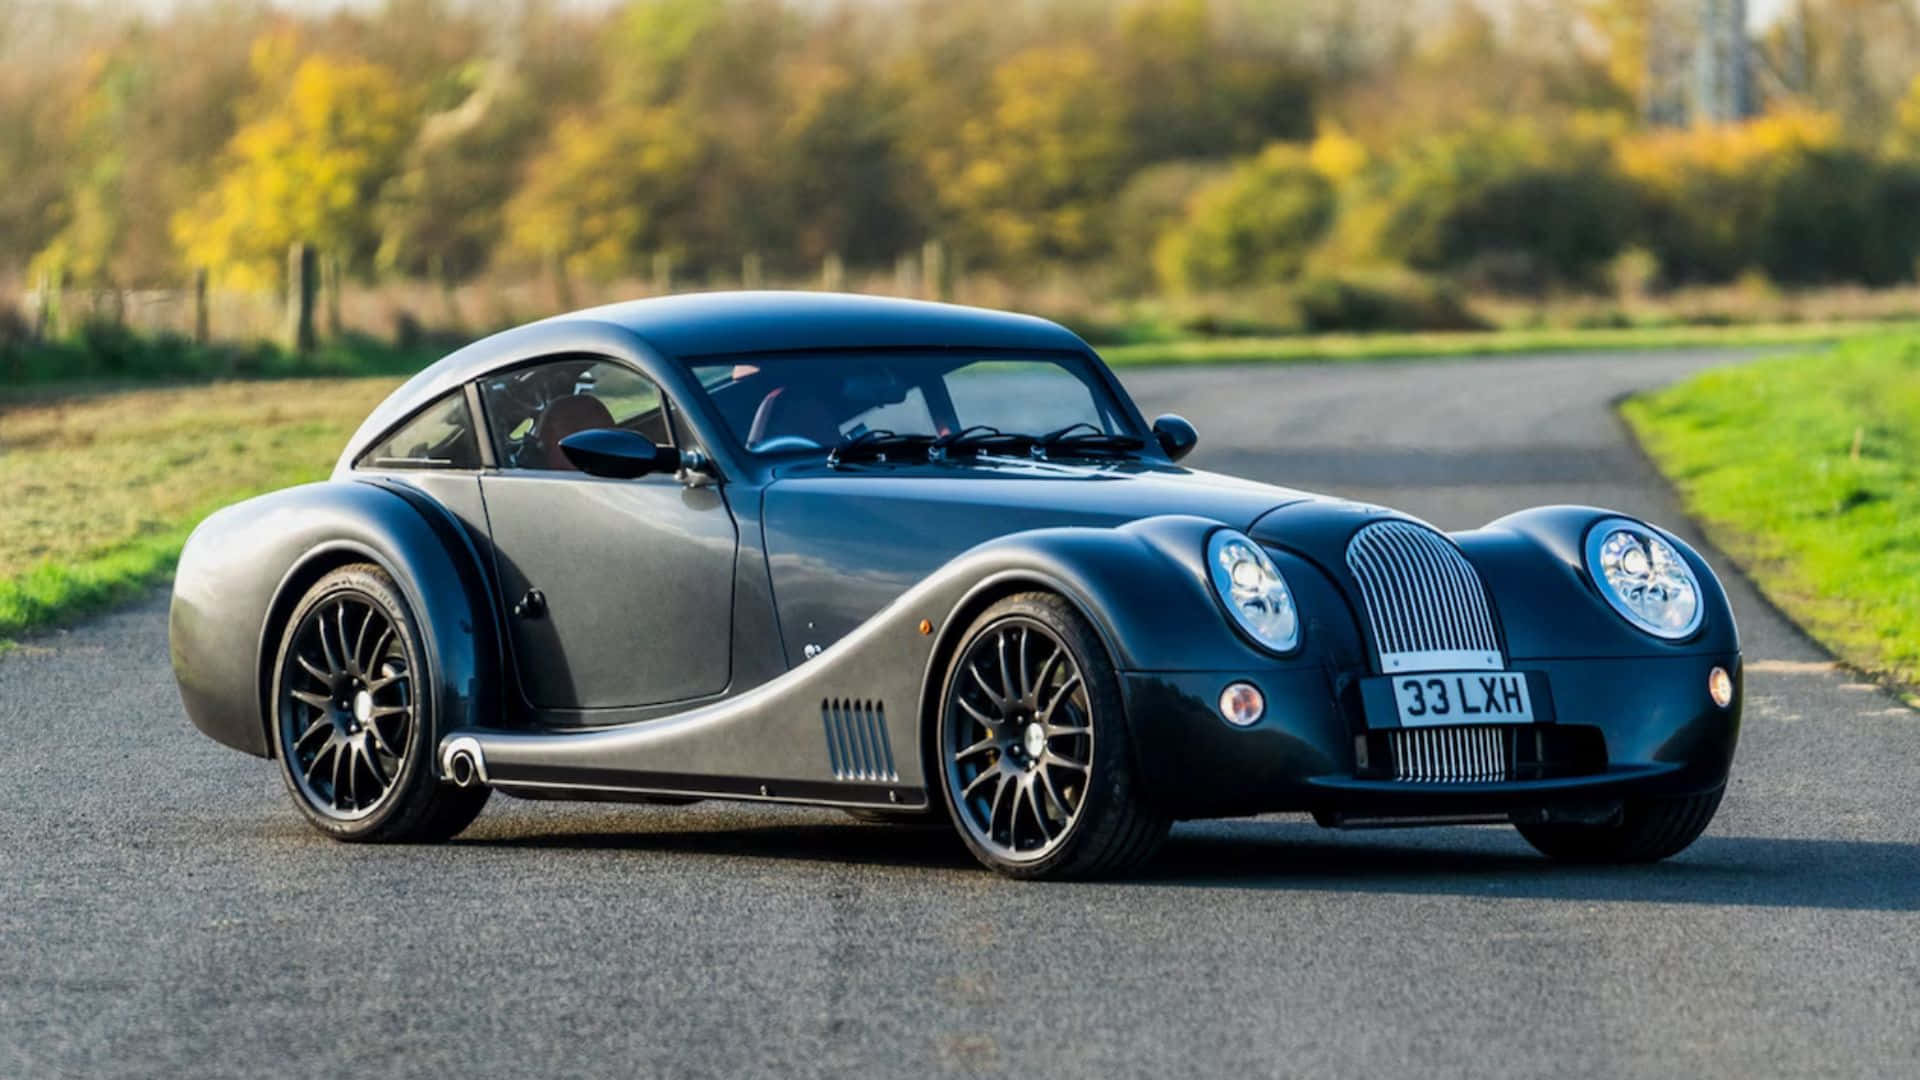 A Stunning Shot Of The Classic Morgan Aeromax On The Road. Wallpaper